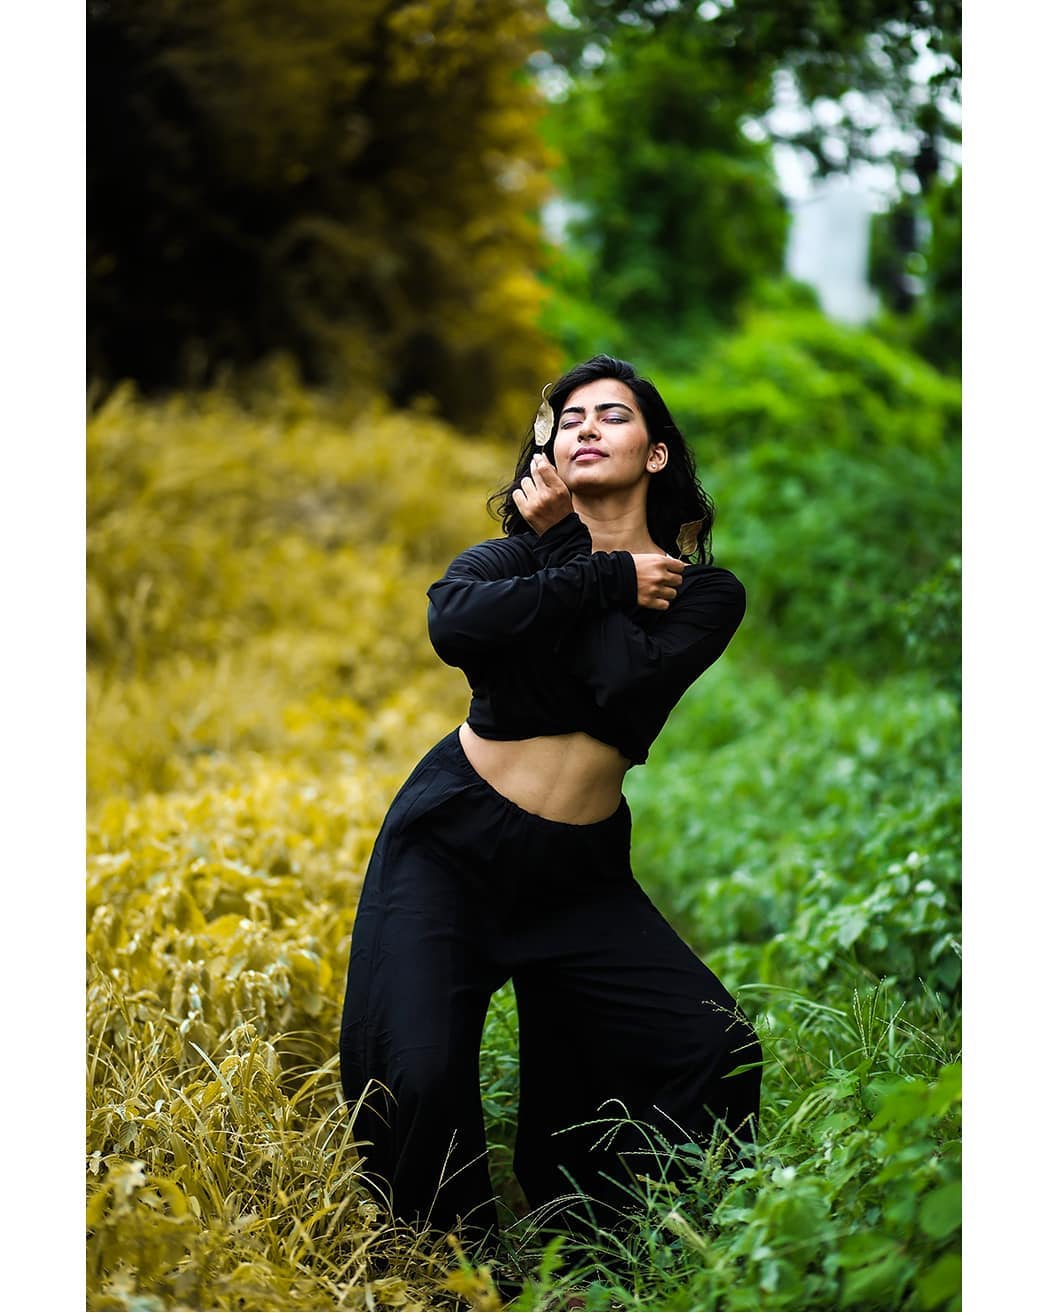 D A N C E in the rhythm of N A T U R E.  It leads us to create one of the bests each time.
.
.
InFrame :Komal
.
.
Dance with Nature Concept Shoot

Shoot By: @dip_memento_photography, ---------------*--------------*----------------*---------------*---------
#streetshoot #streetclassicalshoot #streetconceptshoot #conceptshoot #conceptphotoshoot #ahmedabad #dipmementophotography 
#dslrofficial  #dance #photooftheday #portraitsofficial #50mm  #picoftheday  #girl #indiafeature #keeptagging #9924227745 #_ip #_ig  #bestoftheday #danceshoot #naturelovers
#indiaportraits #indiaportraits #sun #keepdancing